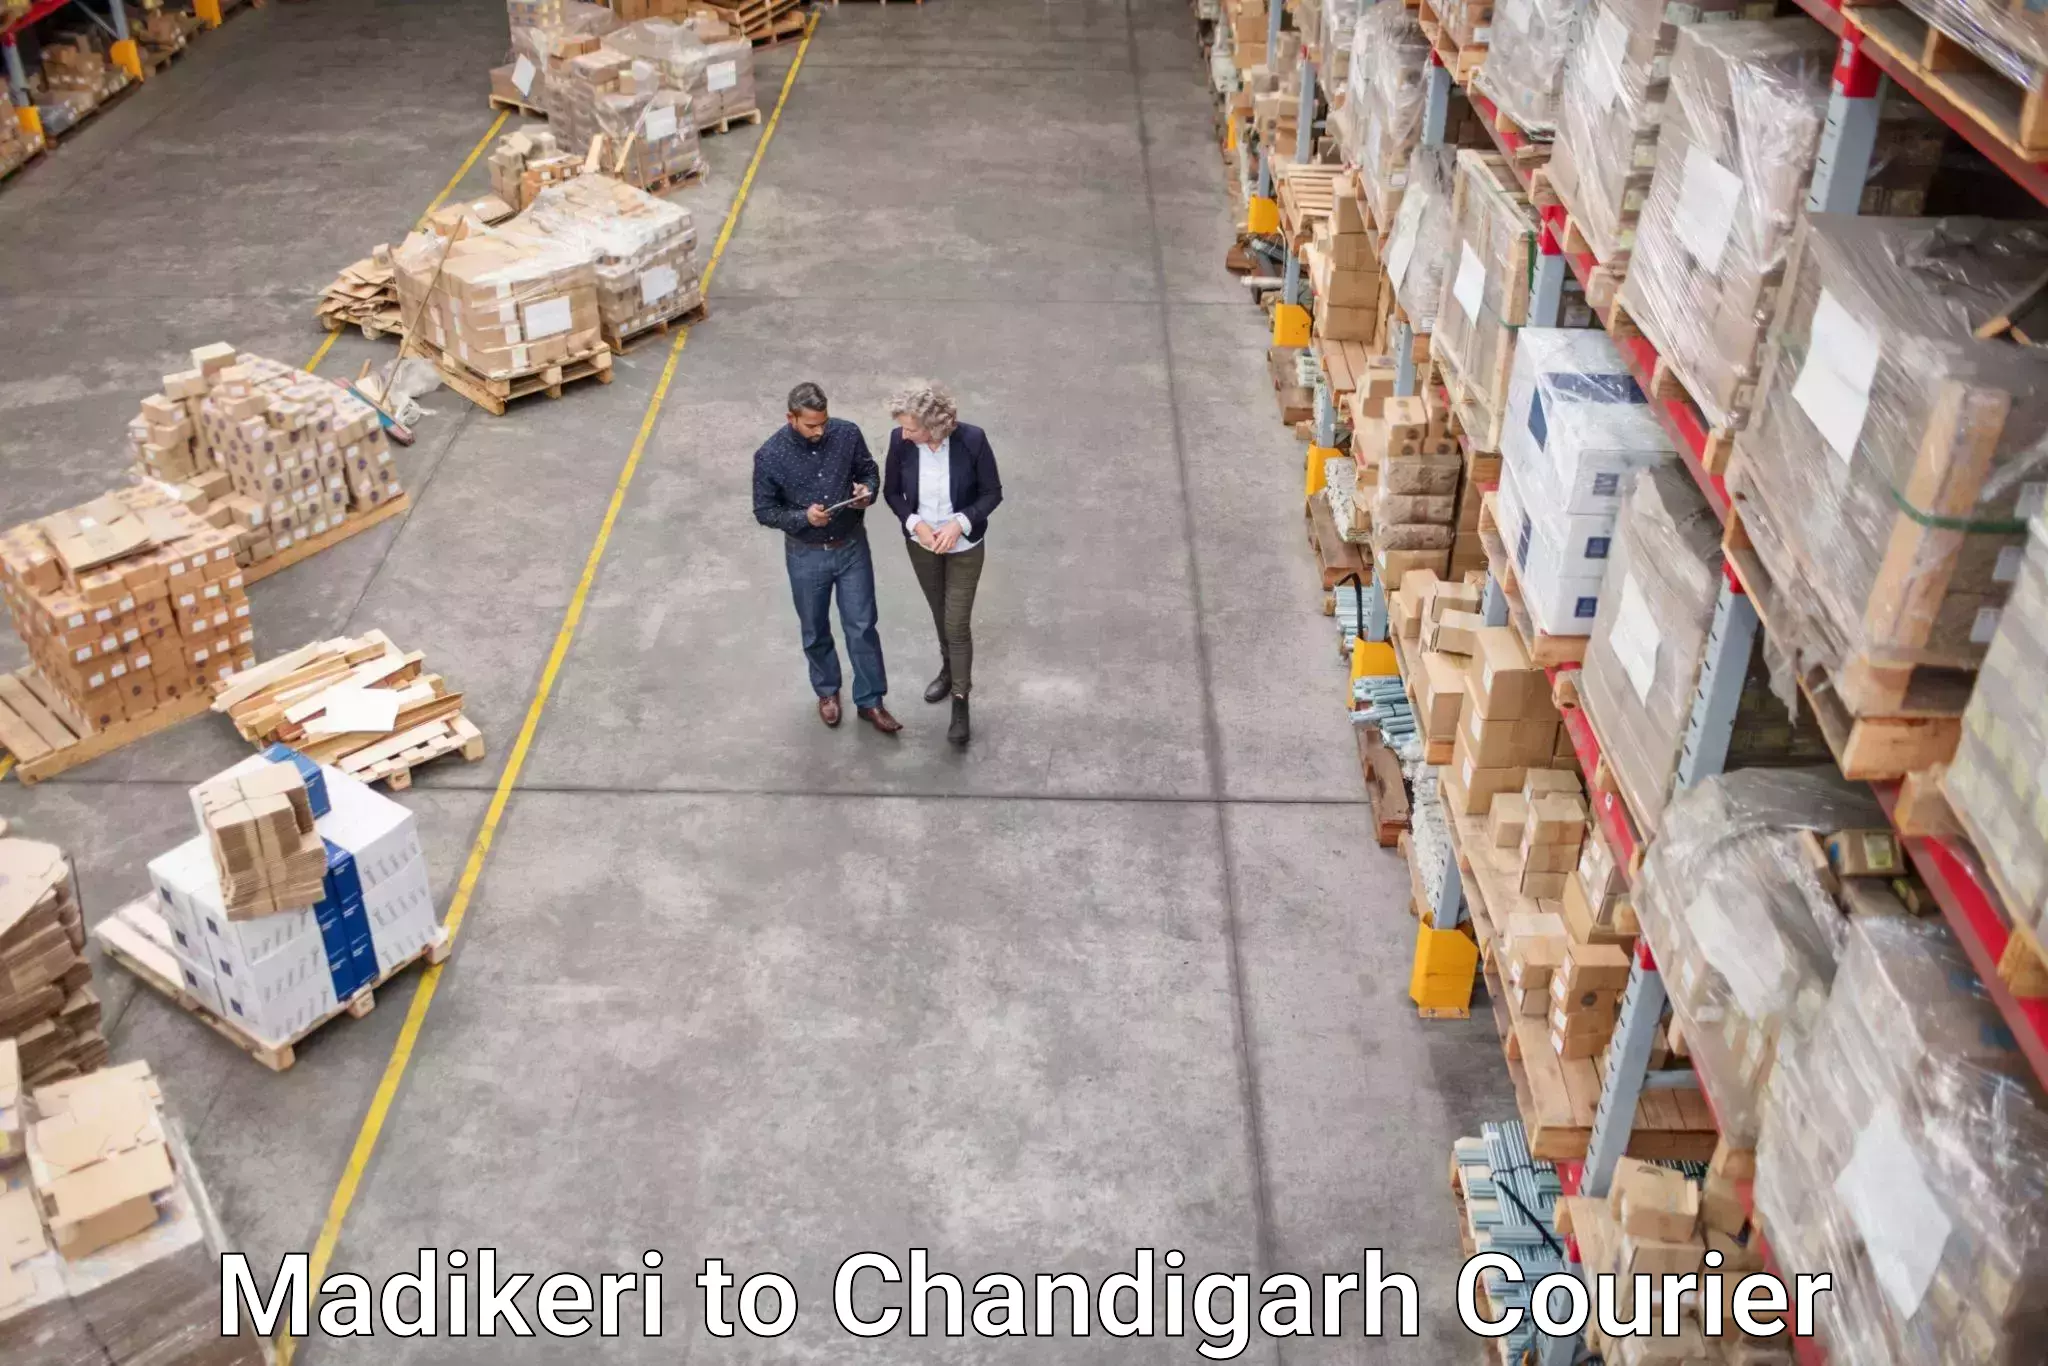 Courier service booking Madikeri to Chandigarh